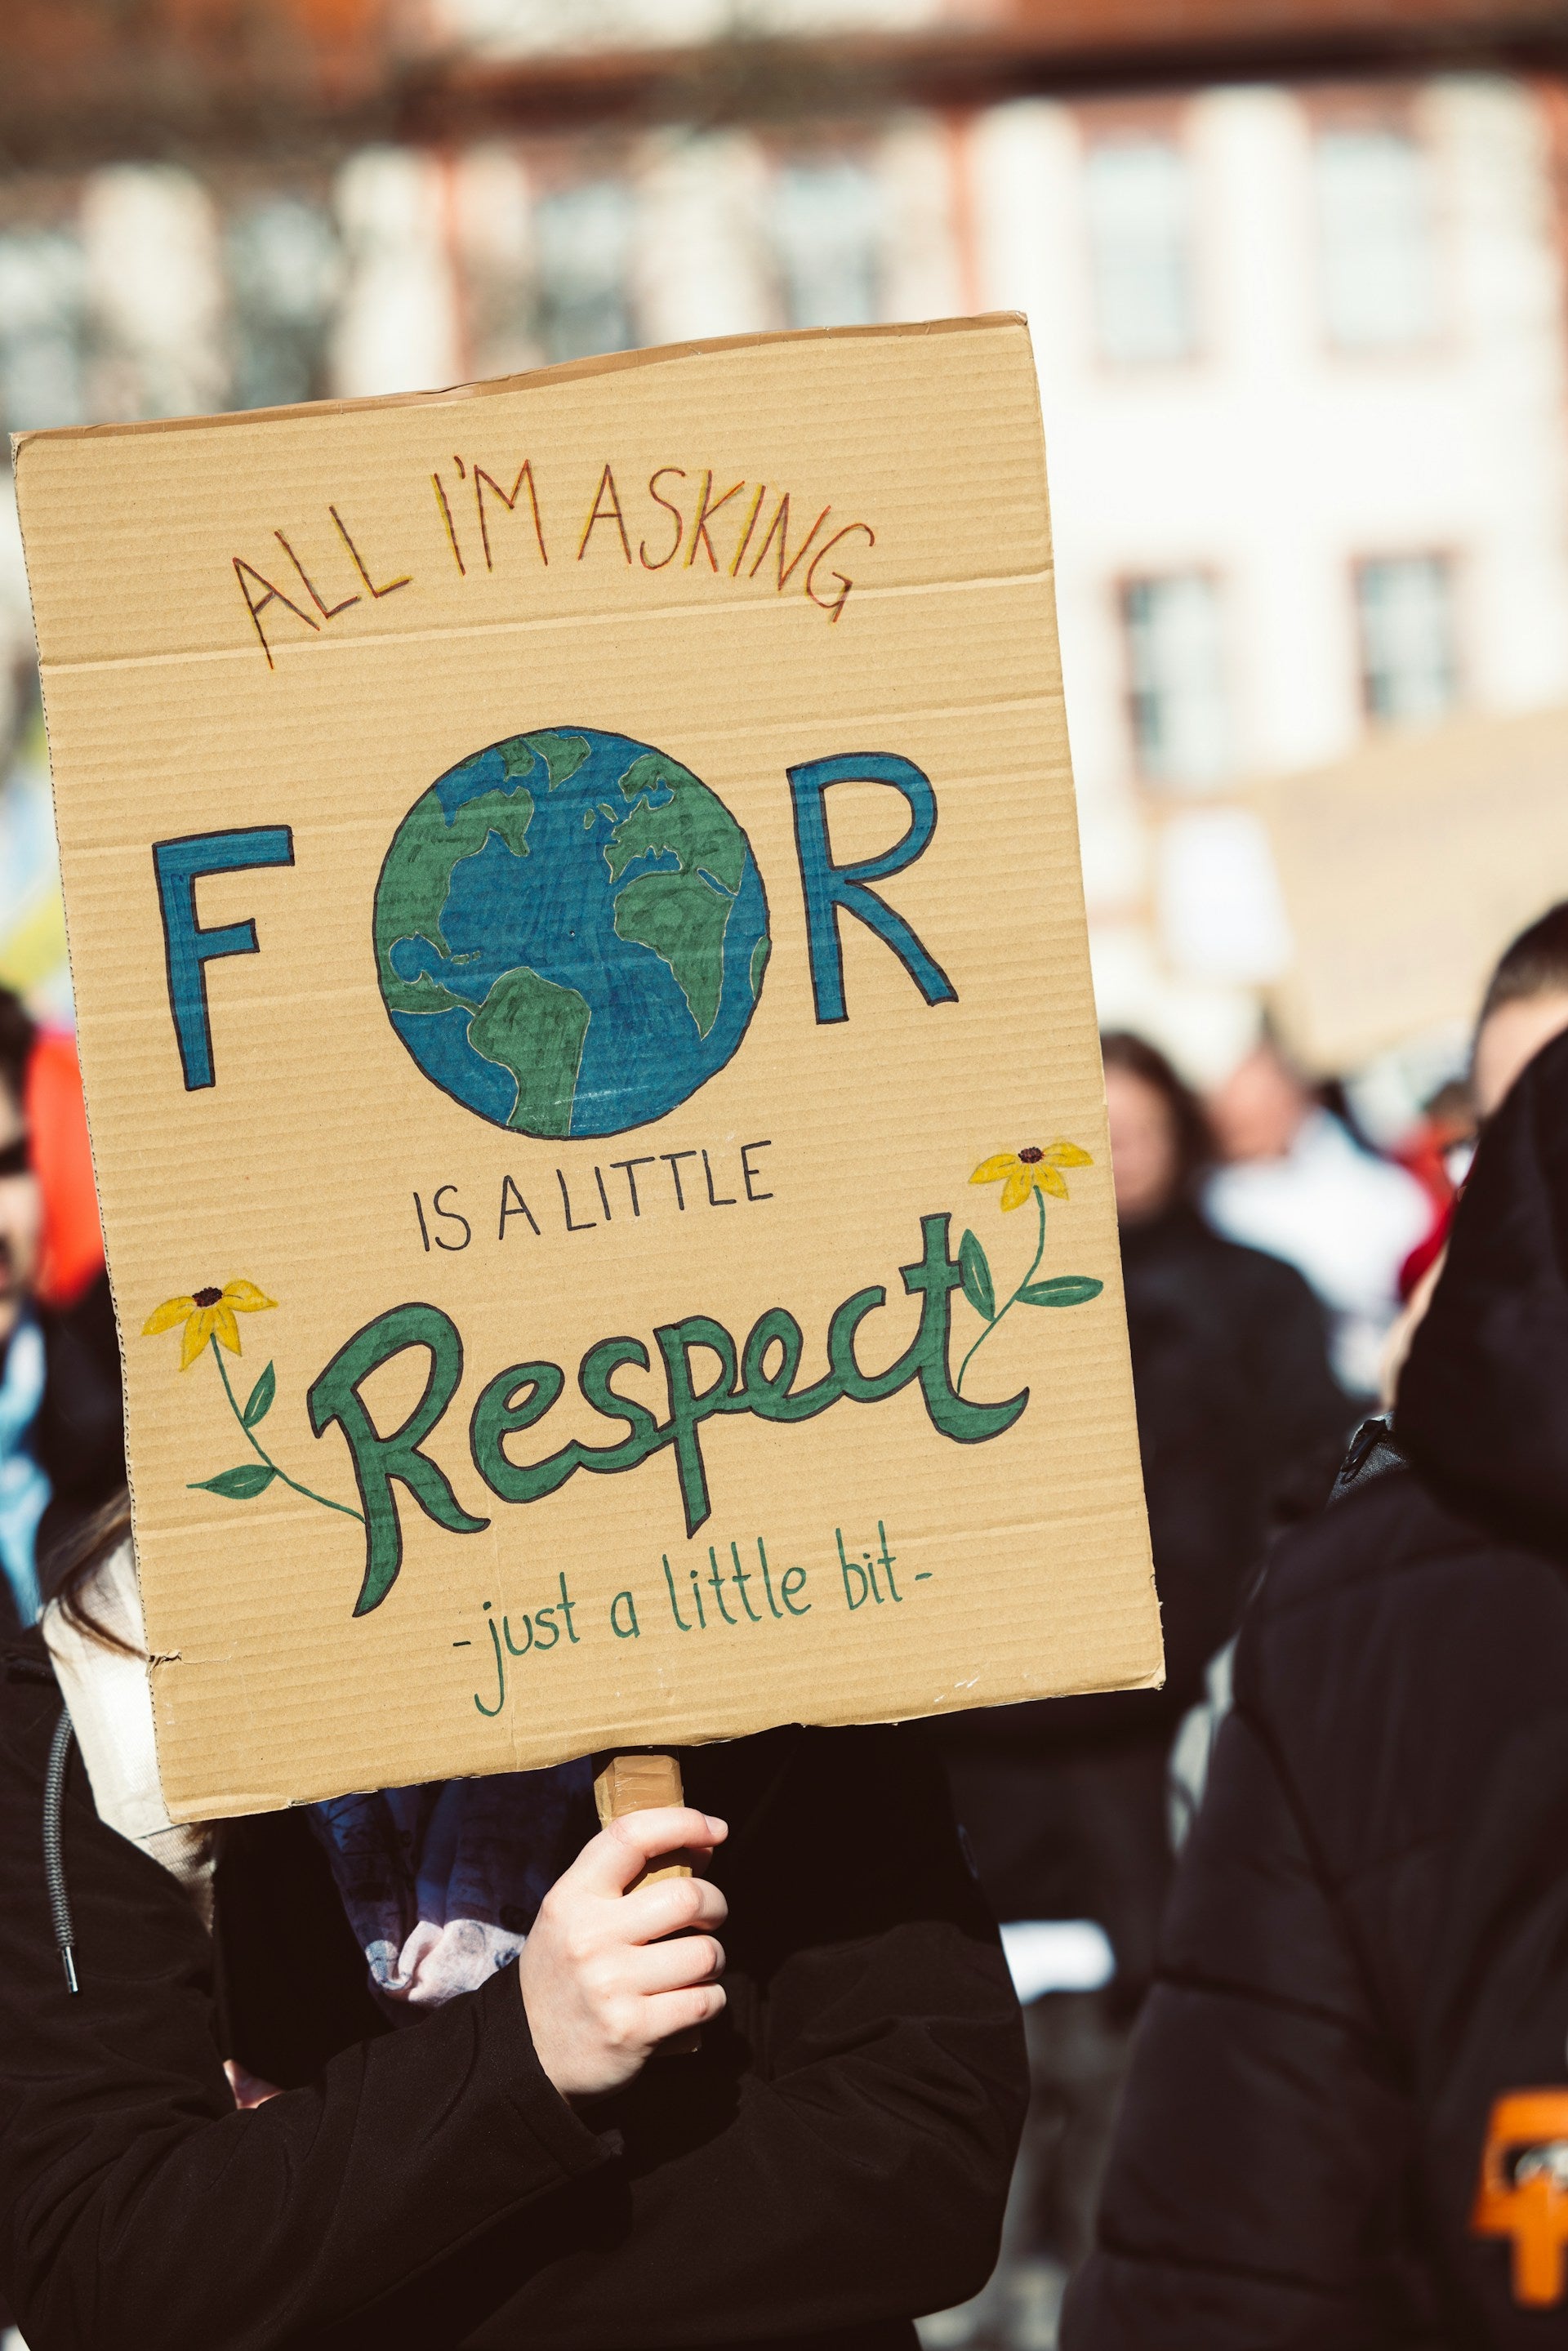 A climate activist with a poster that says "All I'm asking for is a little respect" with the planet hand-drawn on the cardboard